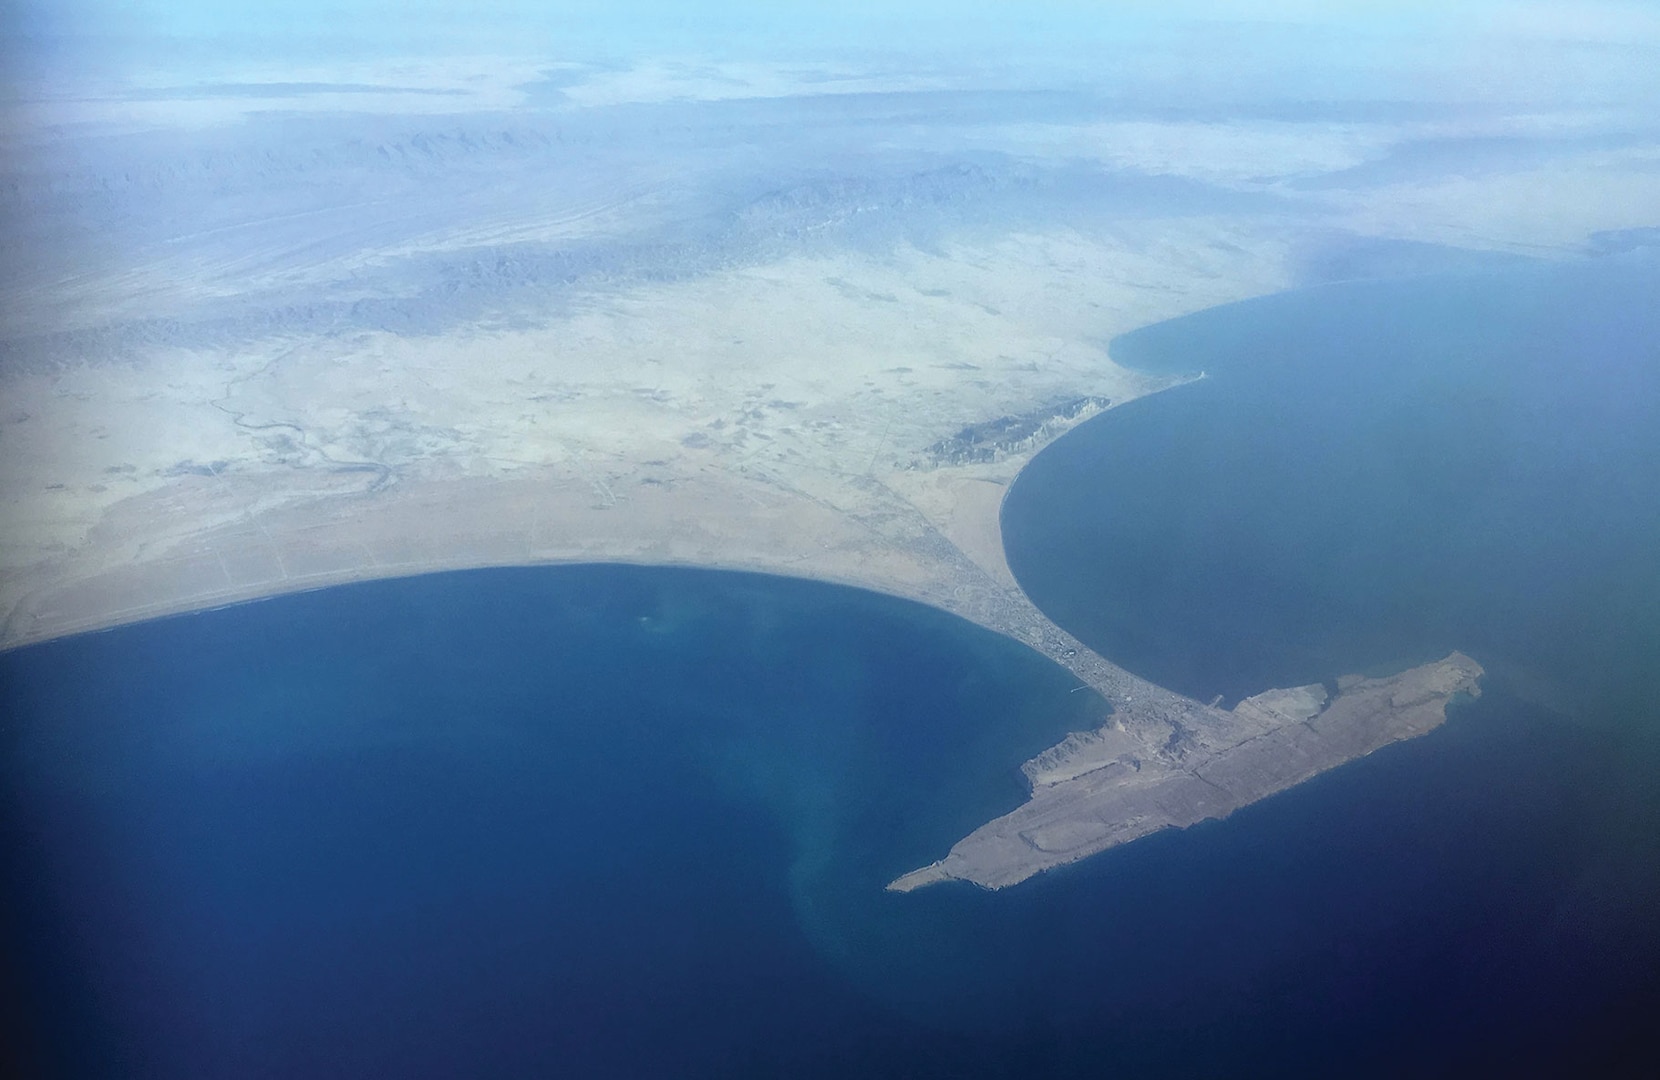 Aerial view of Gwadar (Balochistan), western Pakistan, by the Arab Sea. This port is being leased to China for 43 years under
the China-Pakistan Economic Corridor and is part of China’s “String of Pearls.” (Bjoertvedt, November 7, 2016)